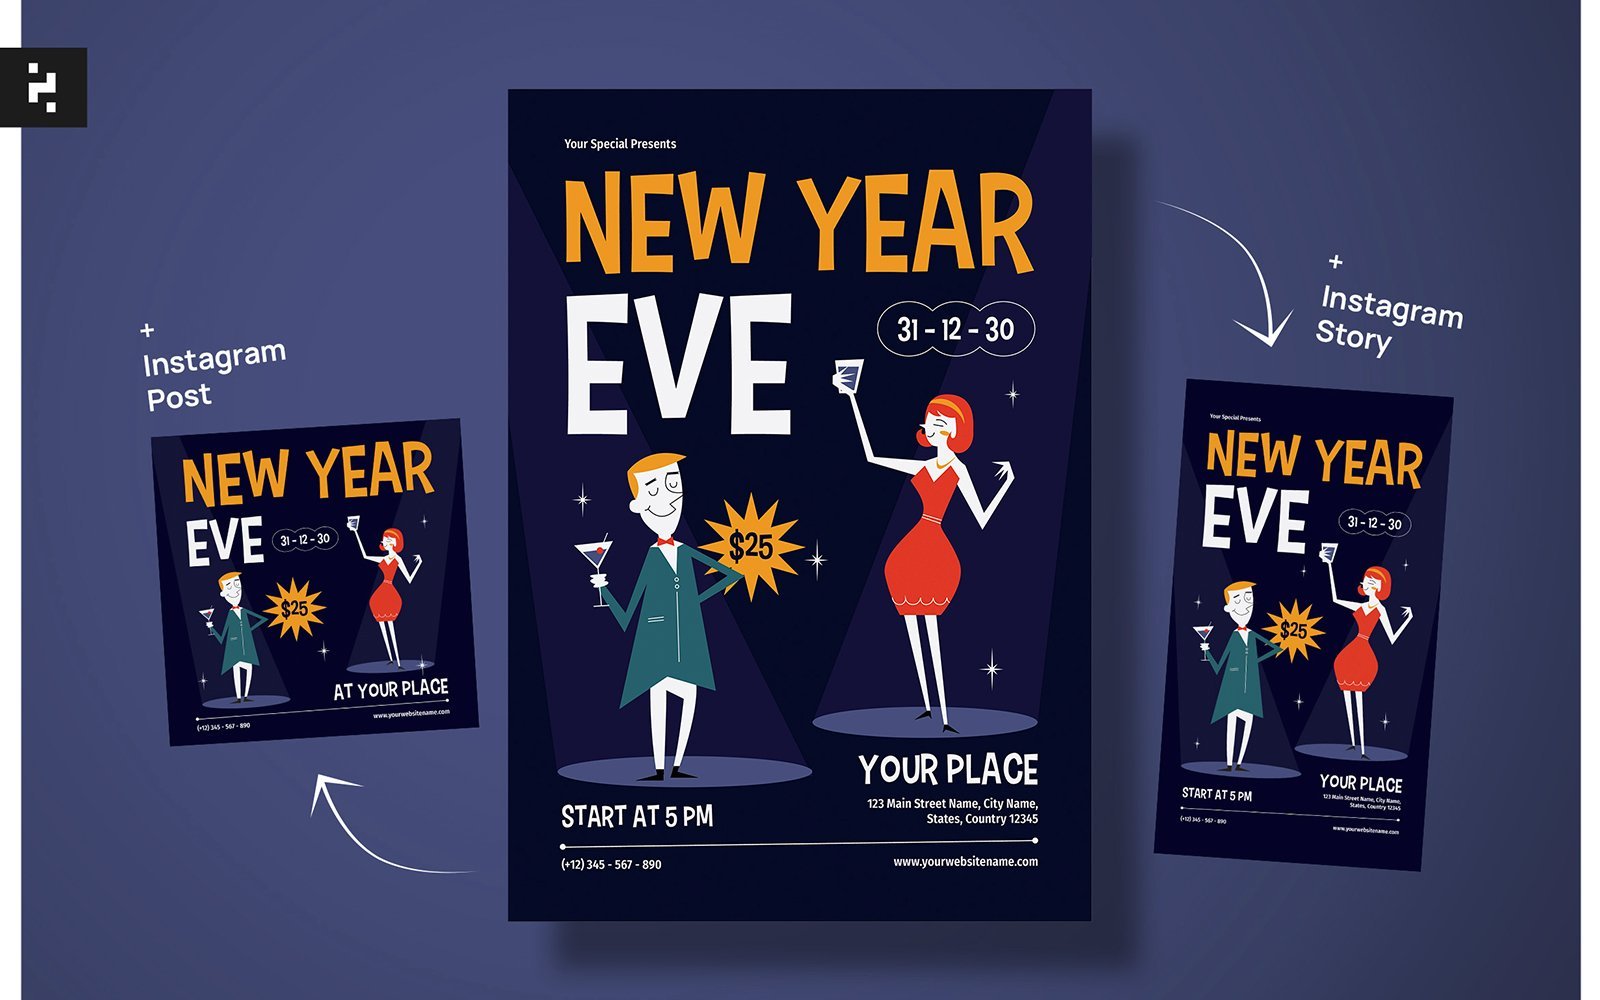 Template #370558 Year Eve Webdesign Template - Logo template Preview